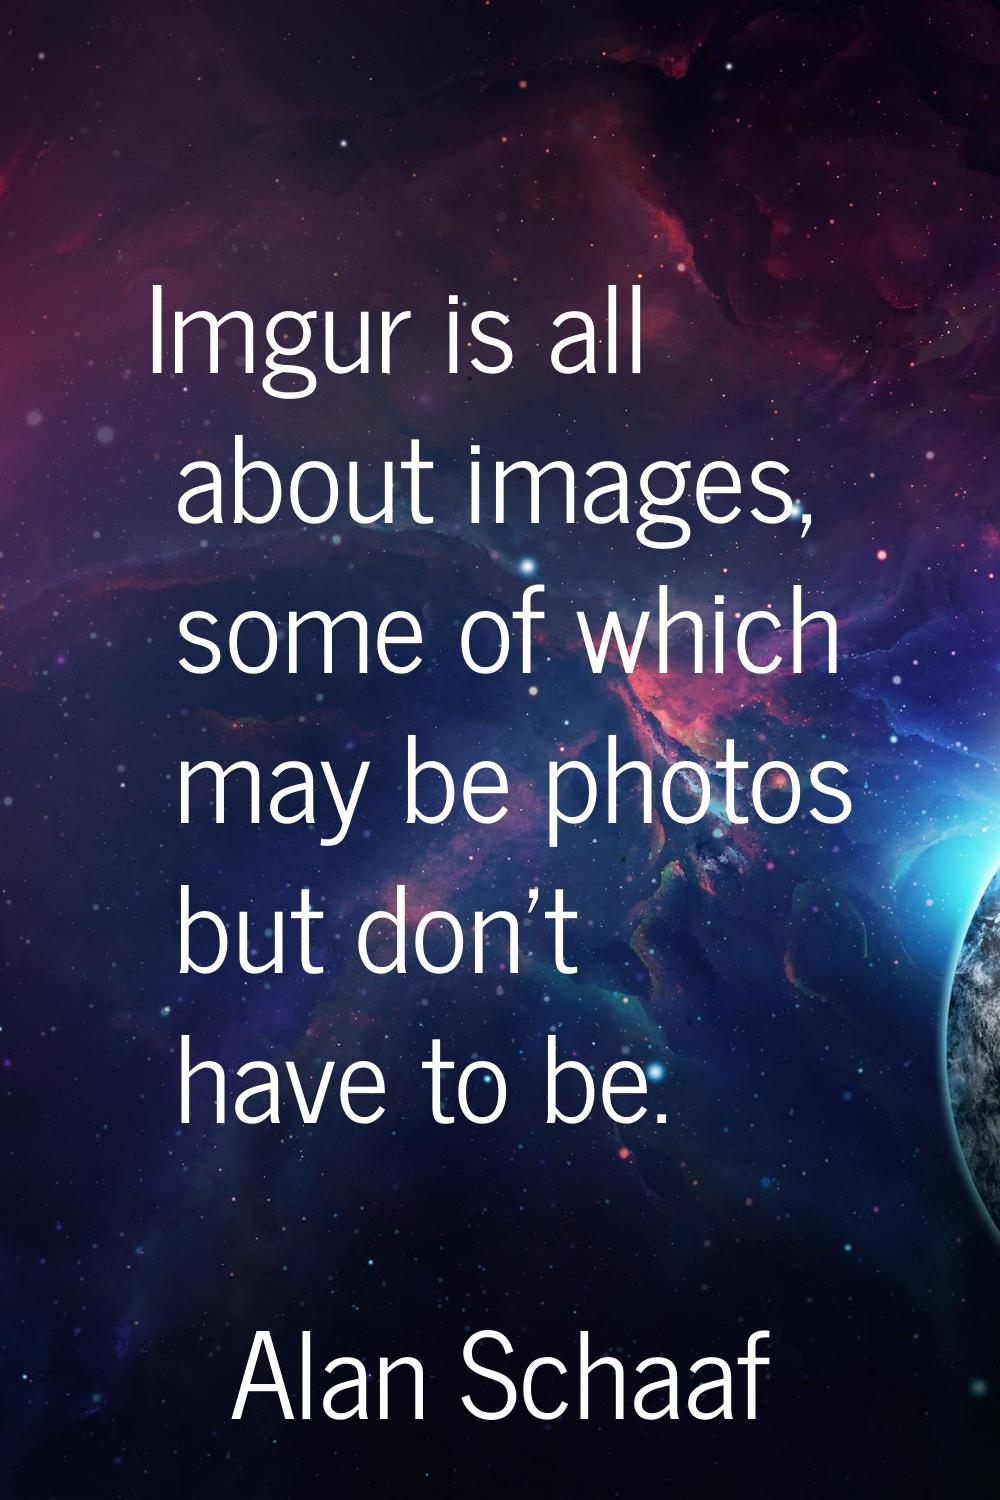 Imgur is all about images, some of which may be photos but don't have to be.